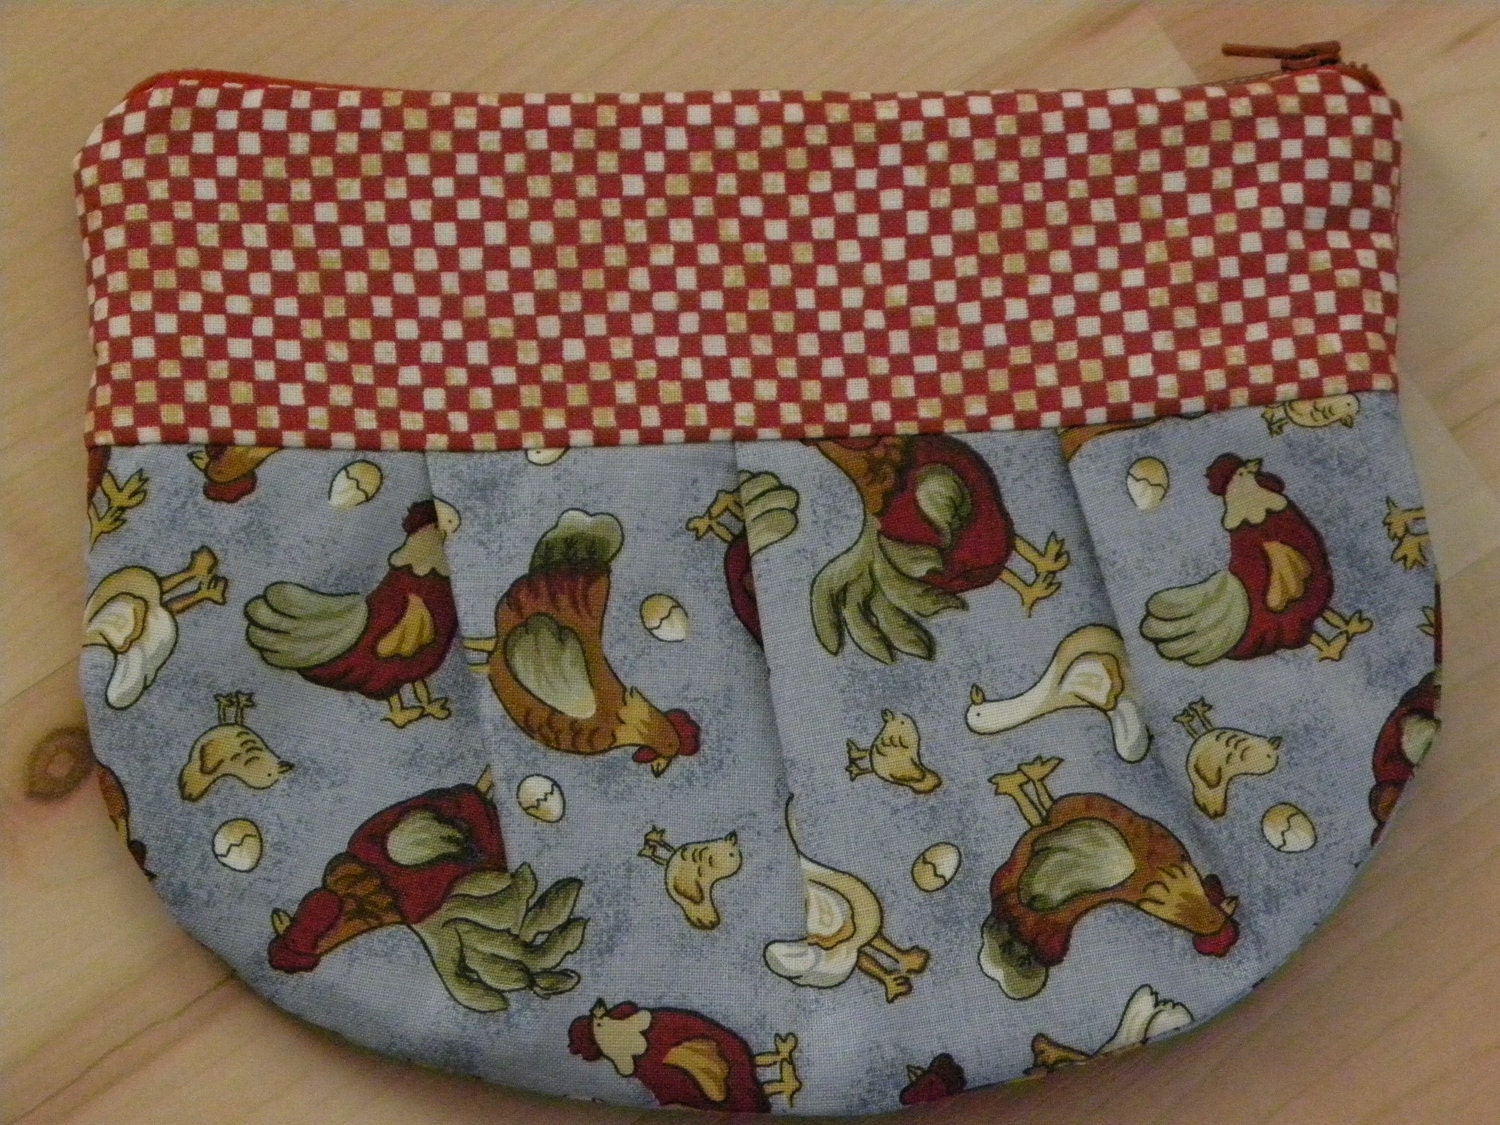 zippy pouch/change purse/makeup bag/ whatever you want to put in it